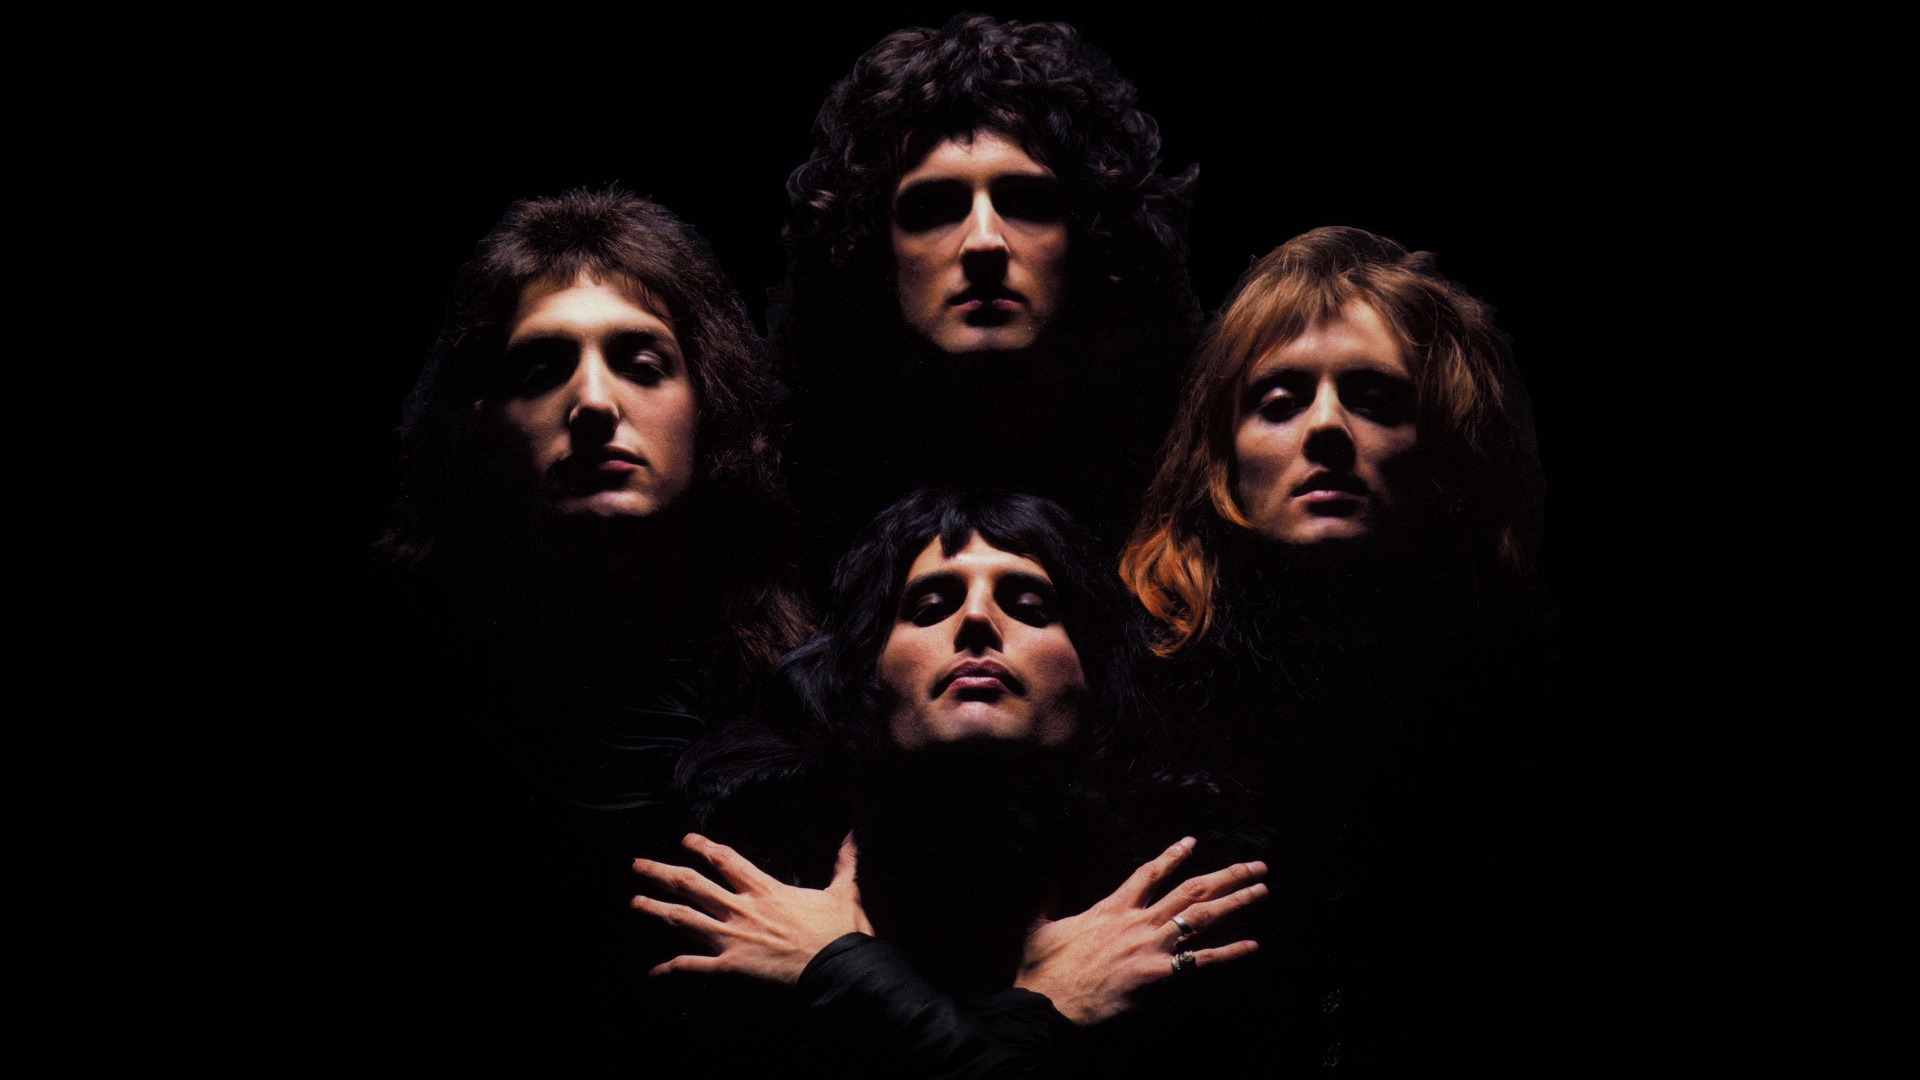 Queen for 1920 x 1080 HDTV 1080p resolution